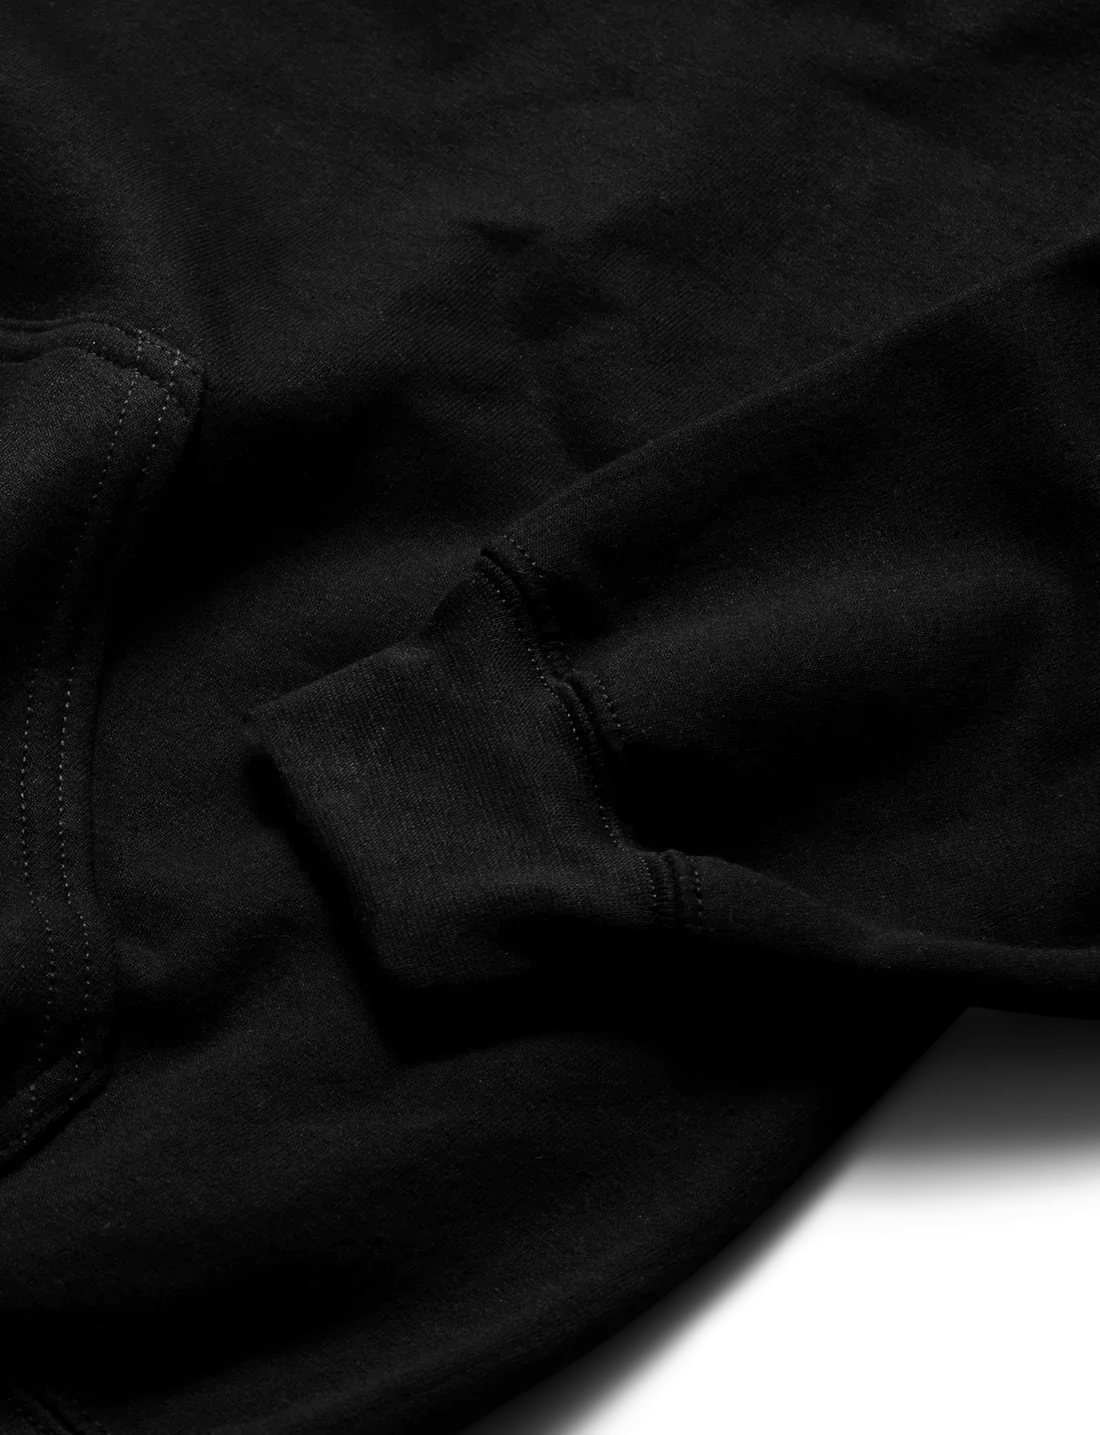 Textured detail of Alan Walker Blueprint Hoodie showcasing the quality black fabric and fine stitching around the cuff, exemplifying the garment's craftsmanship.